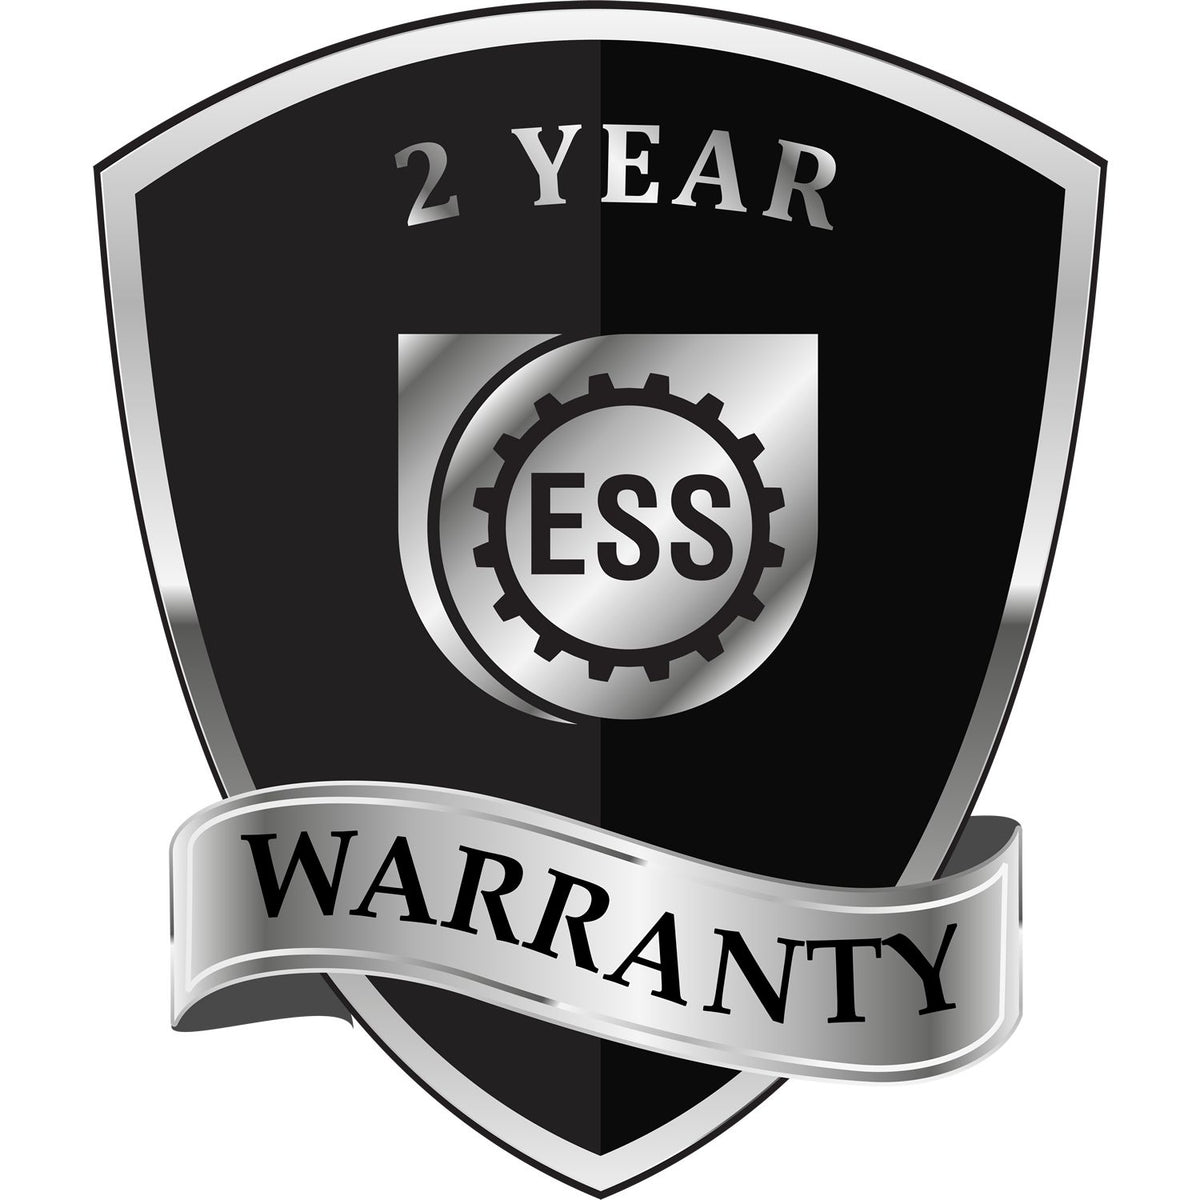 A black and silver badge or emblem showing warranty information for the State of Tennessee Extended Long Reach Geologist Seal